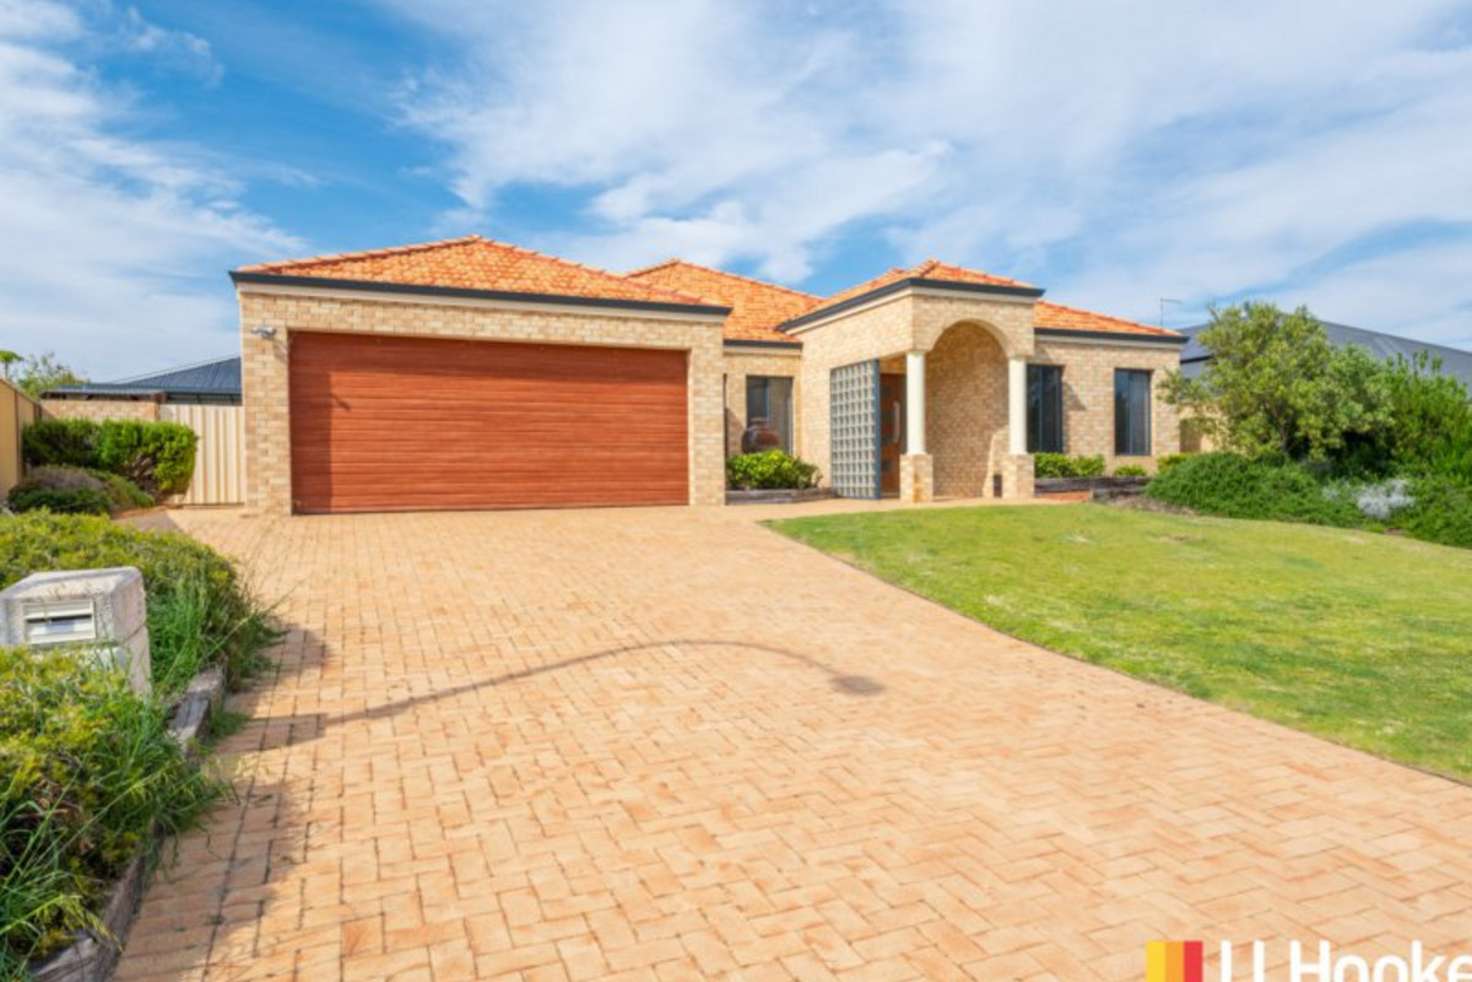 Main view of Homely house listing, 19 Harlequin Way, Yanchep WA 6035